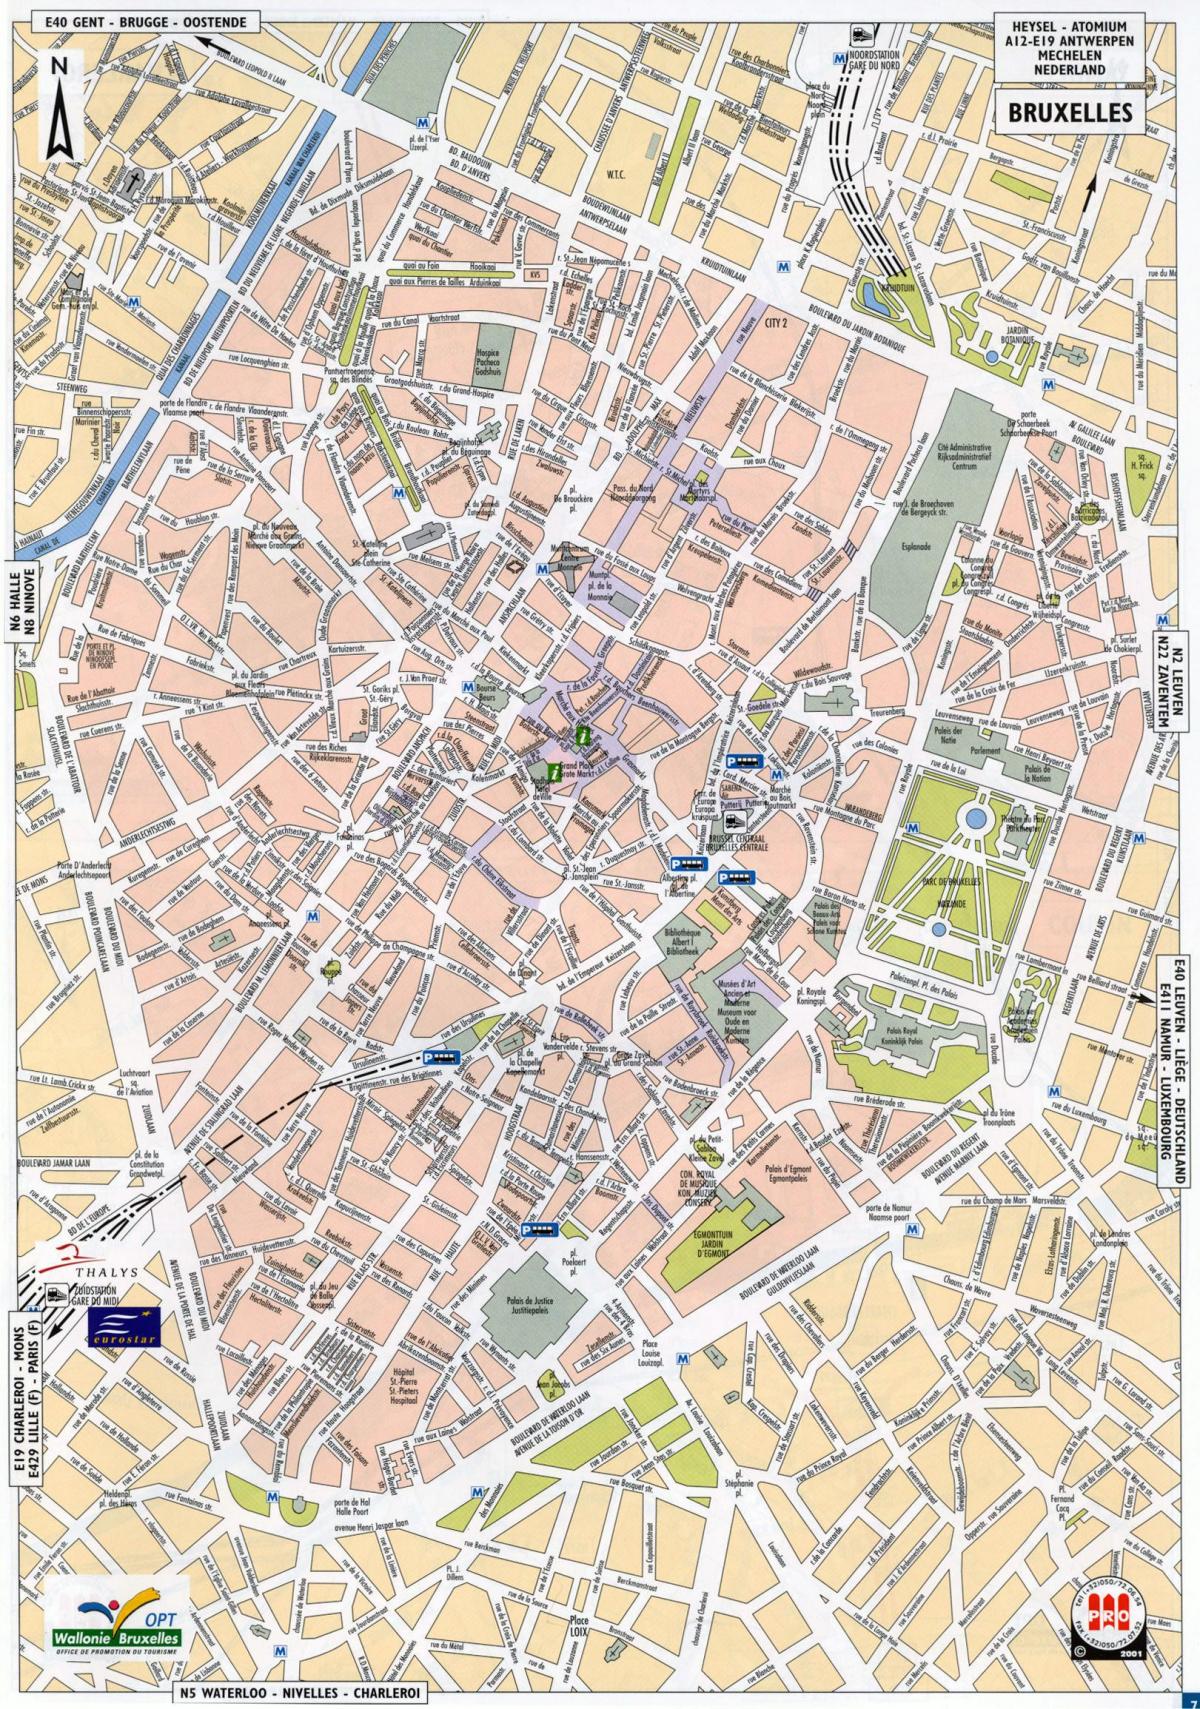 Brussels streets map